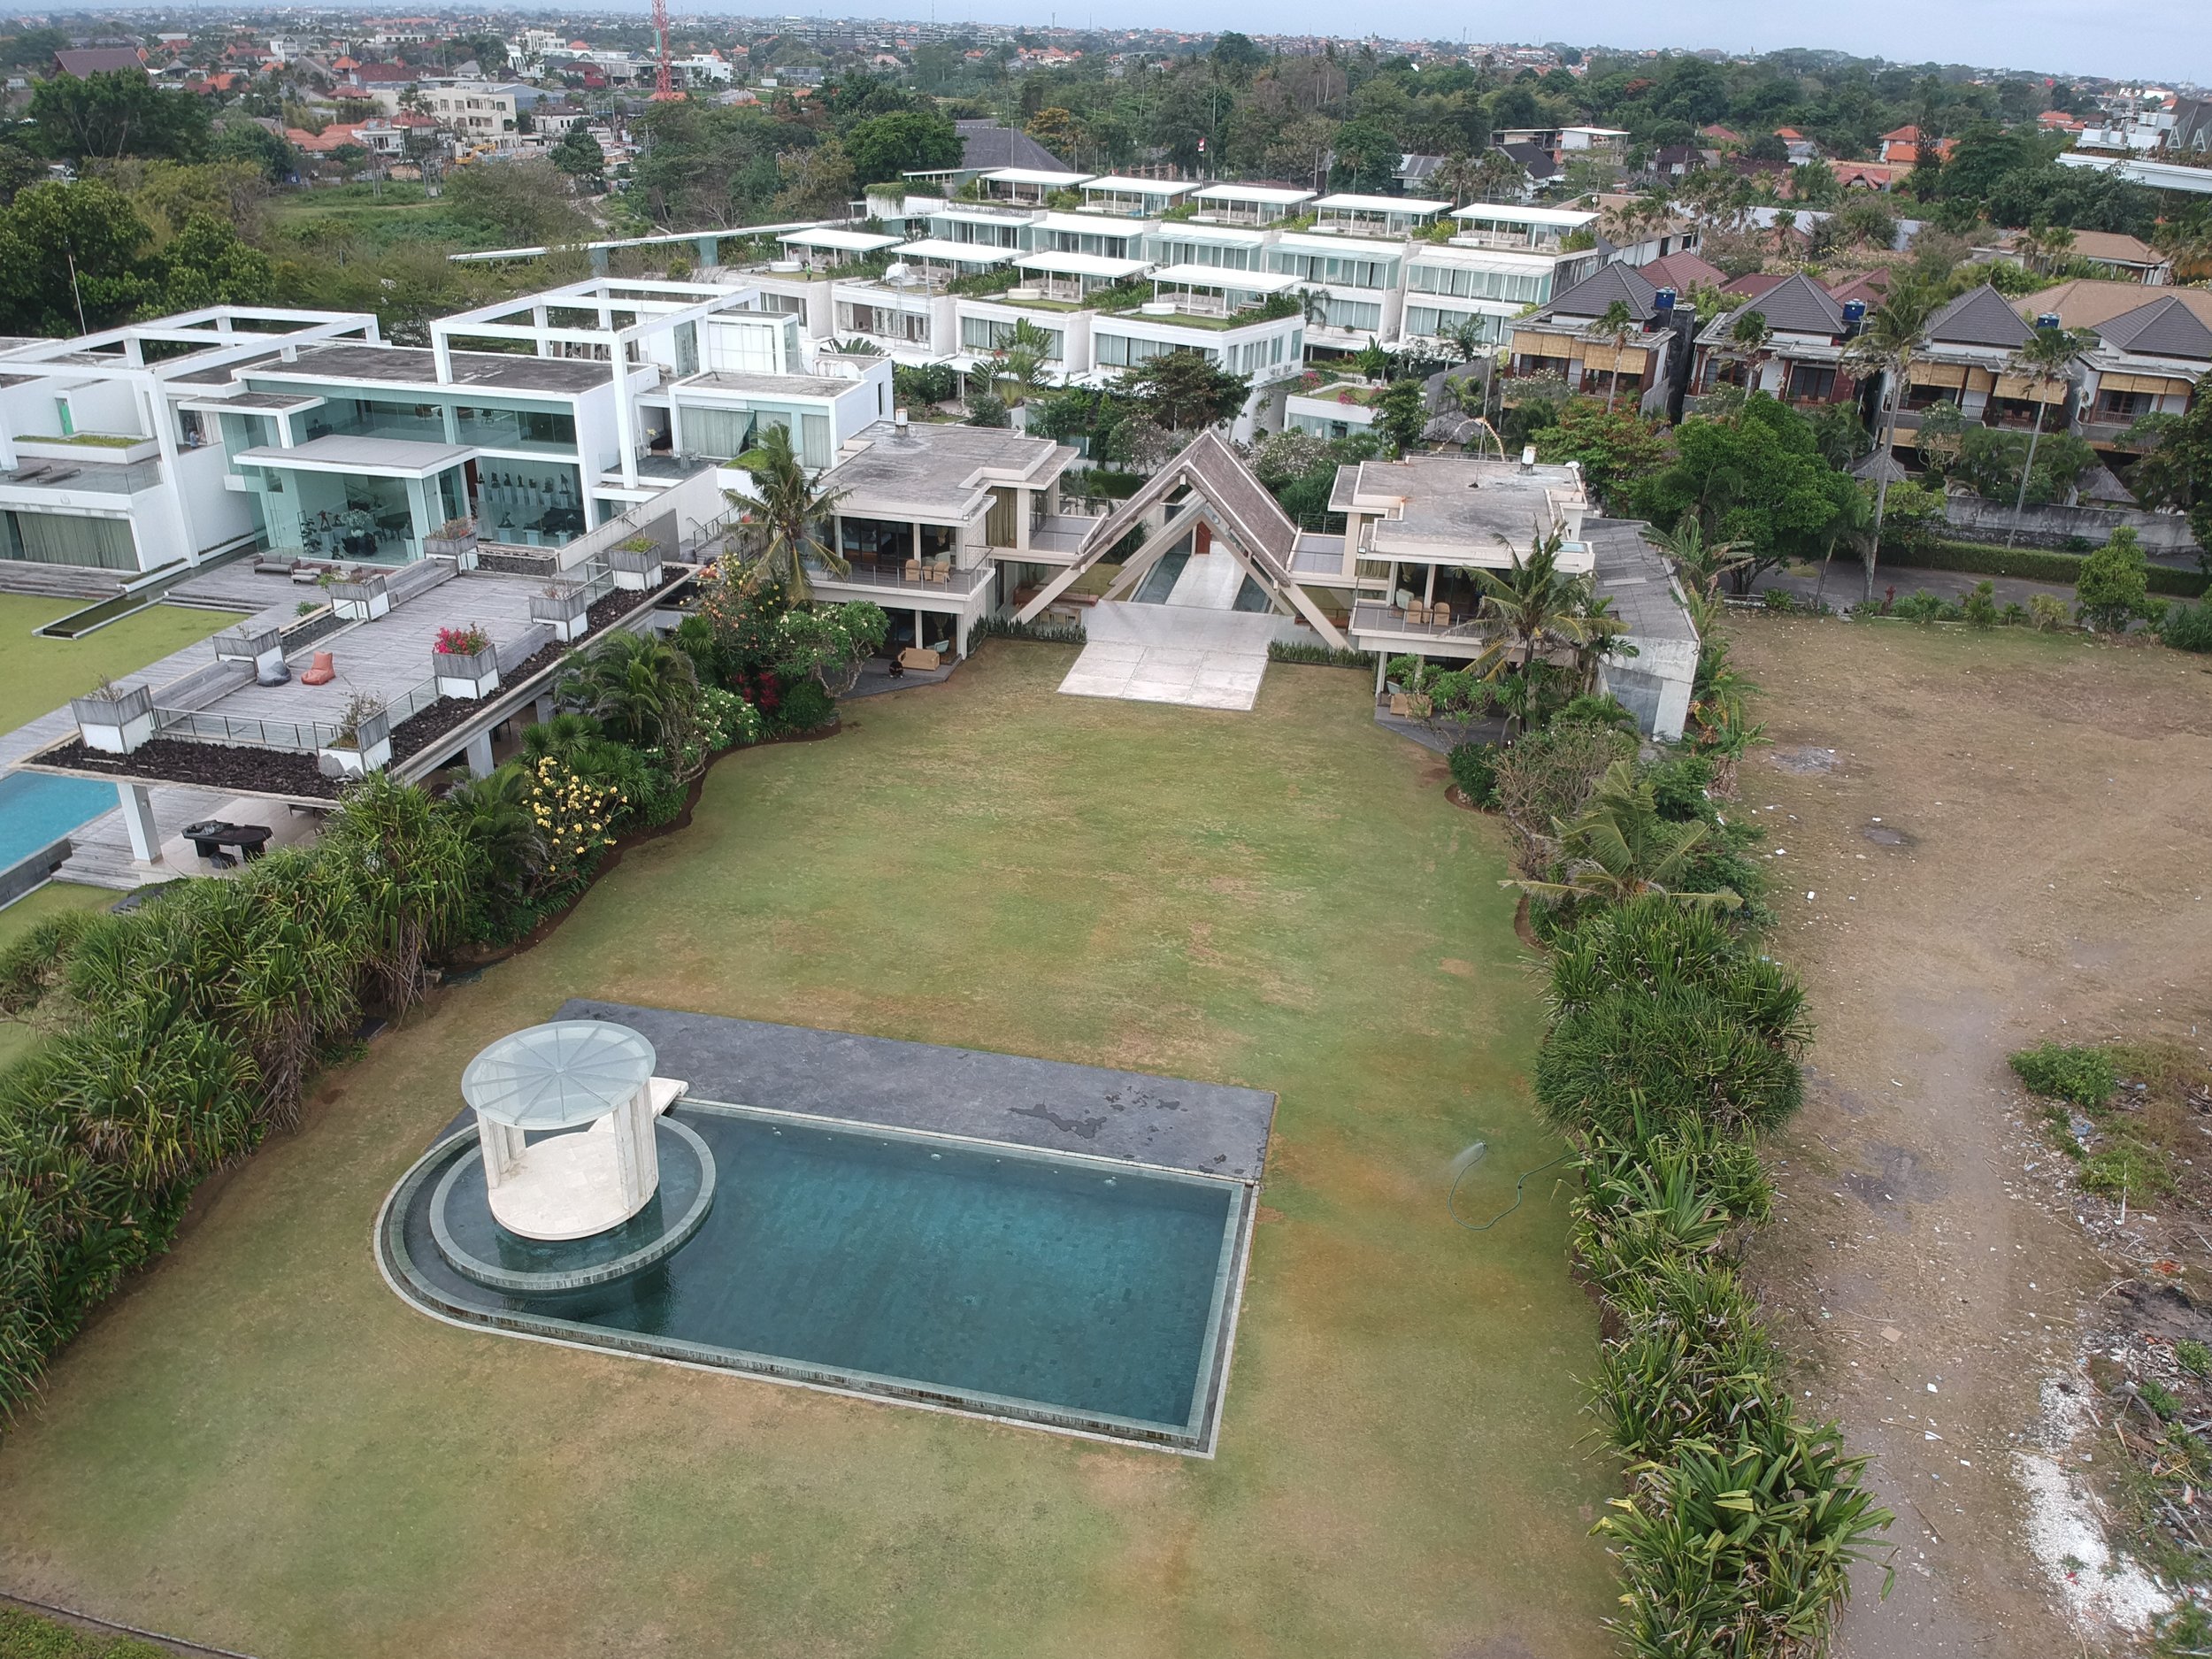 Overview of Phalosa Villa, Image from A Tent in Bali